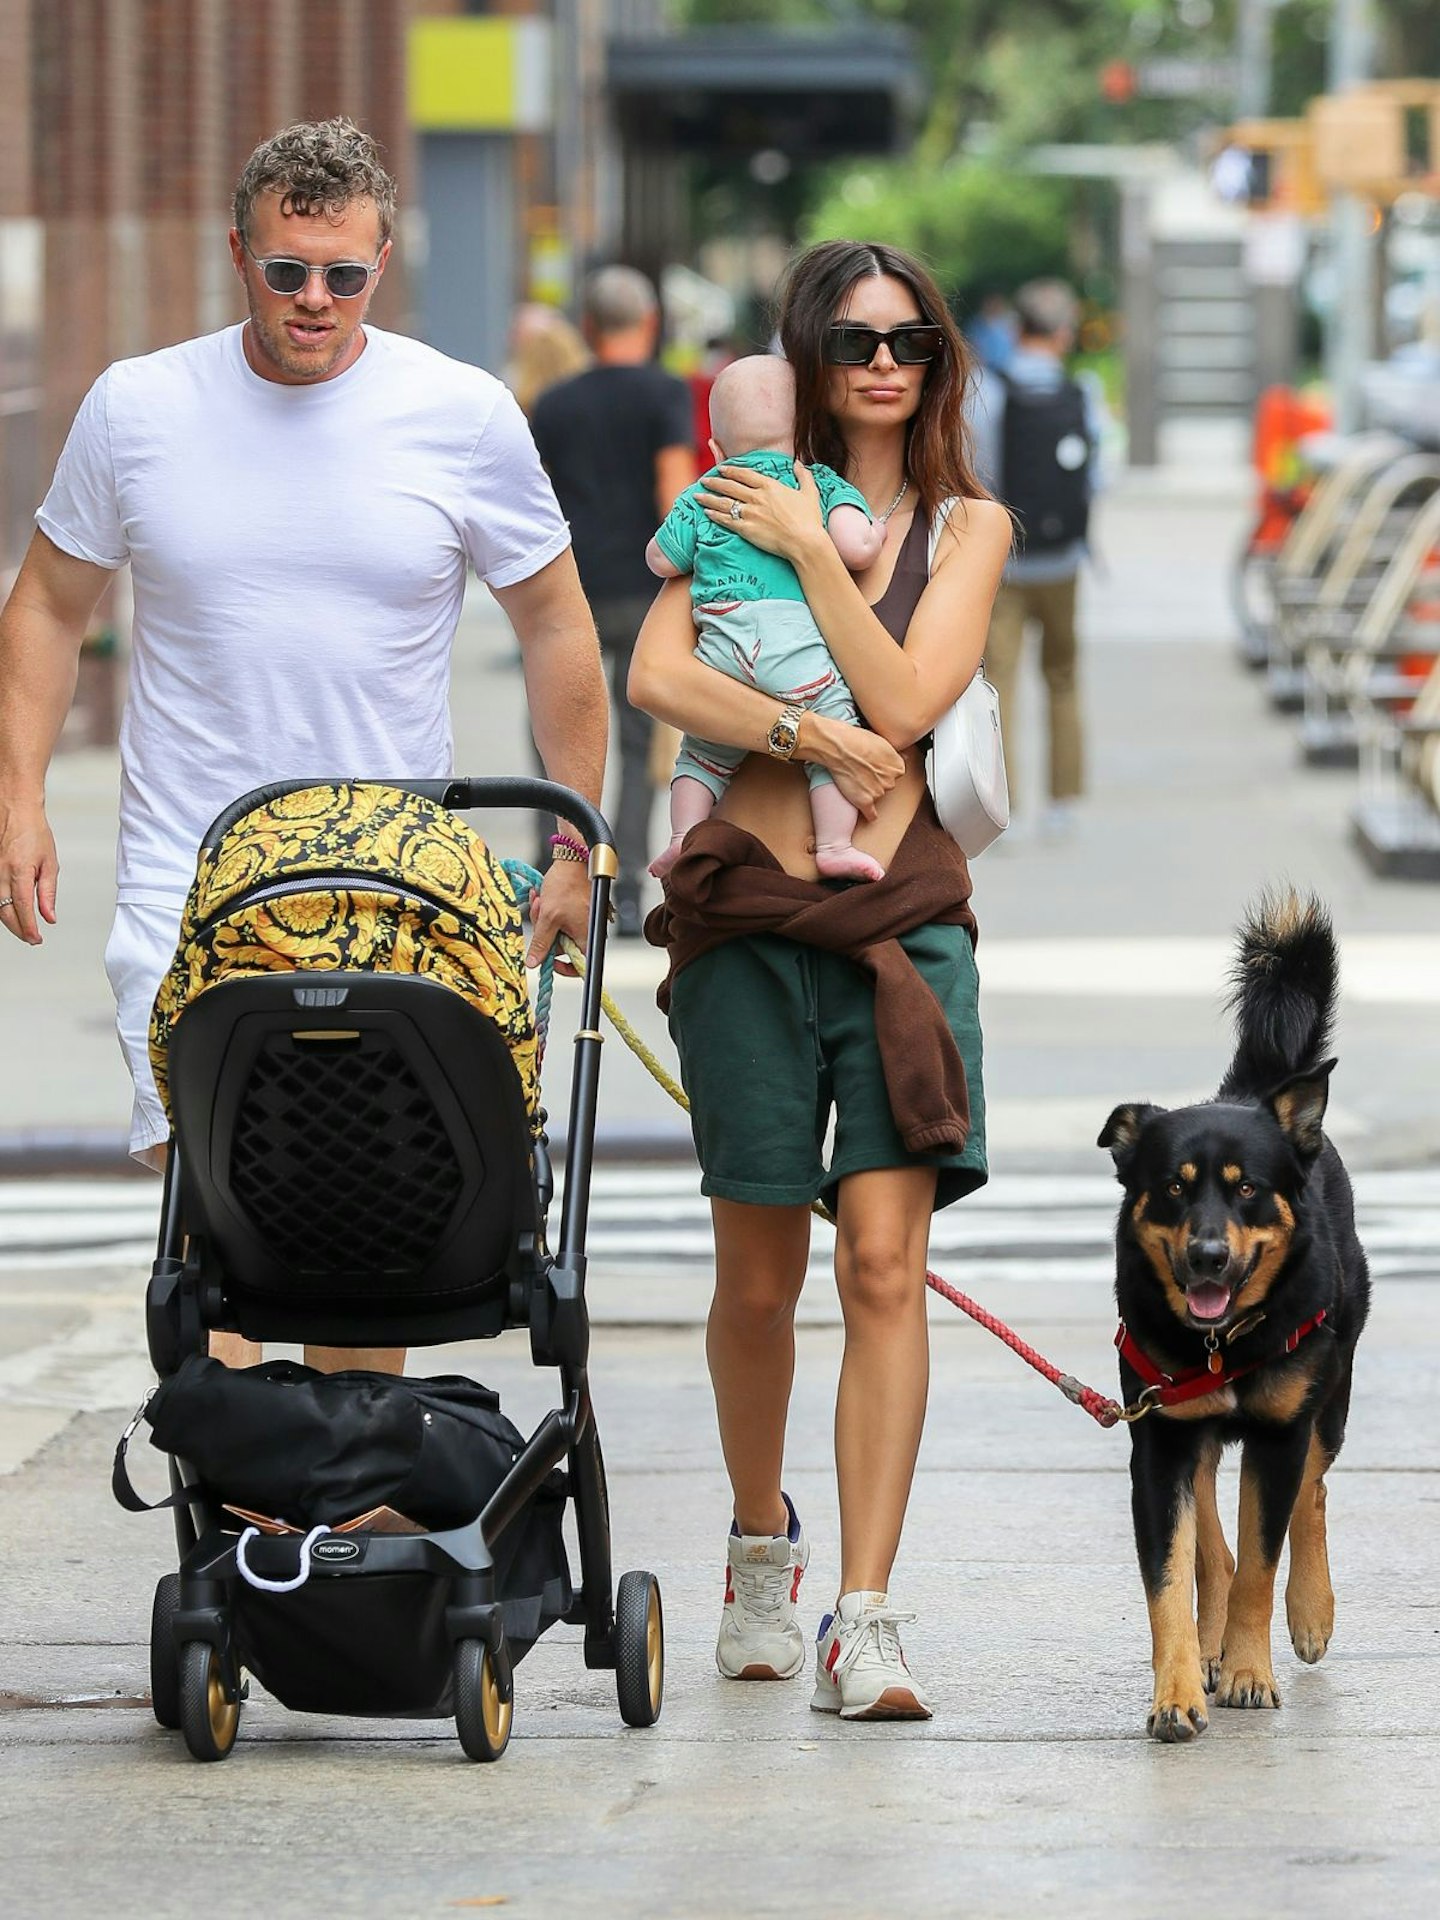 Emily Ratajkowski is seen out for a walk with baby pram and family